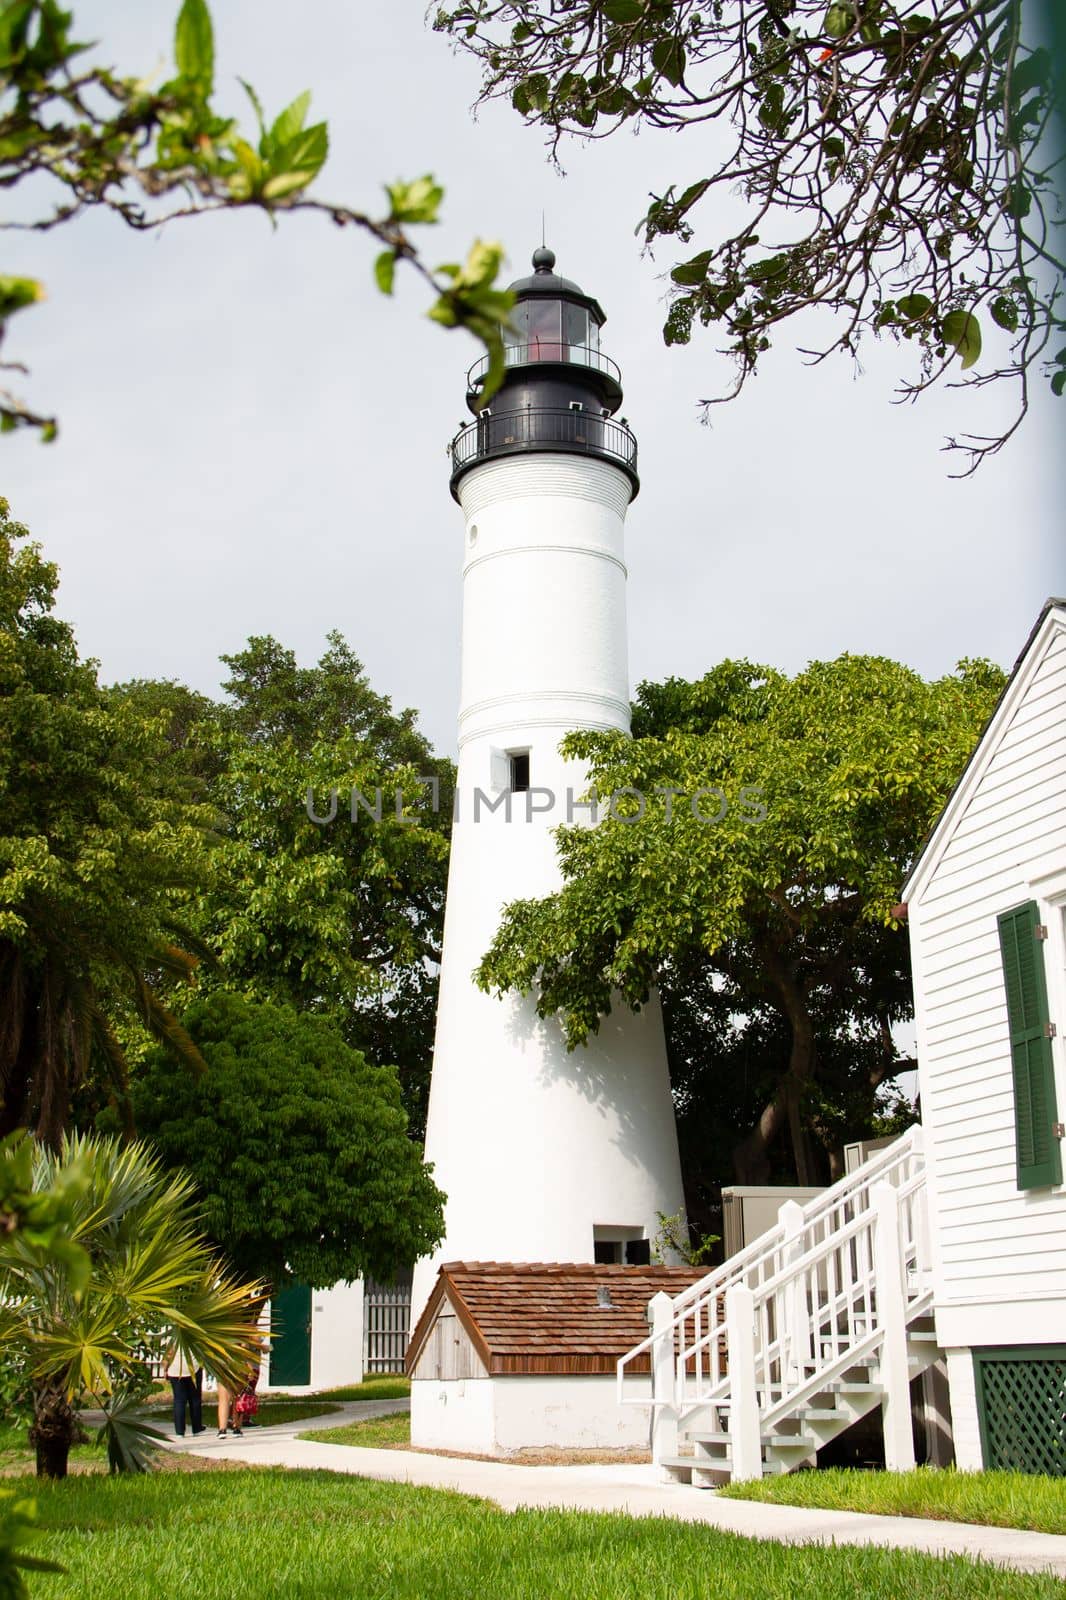 Historic Key West lighthouse located in Key West, Florida now serving as a museum and tourist attraction, United States